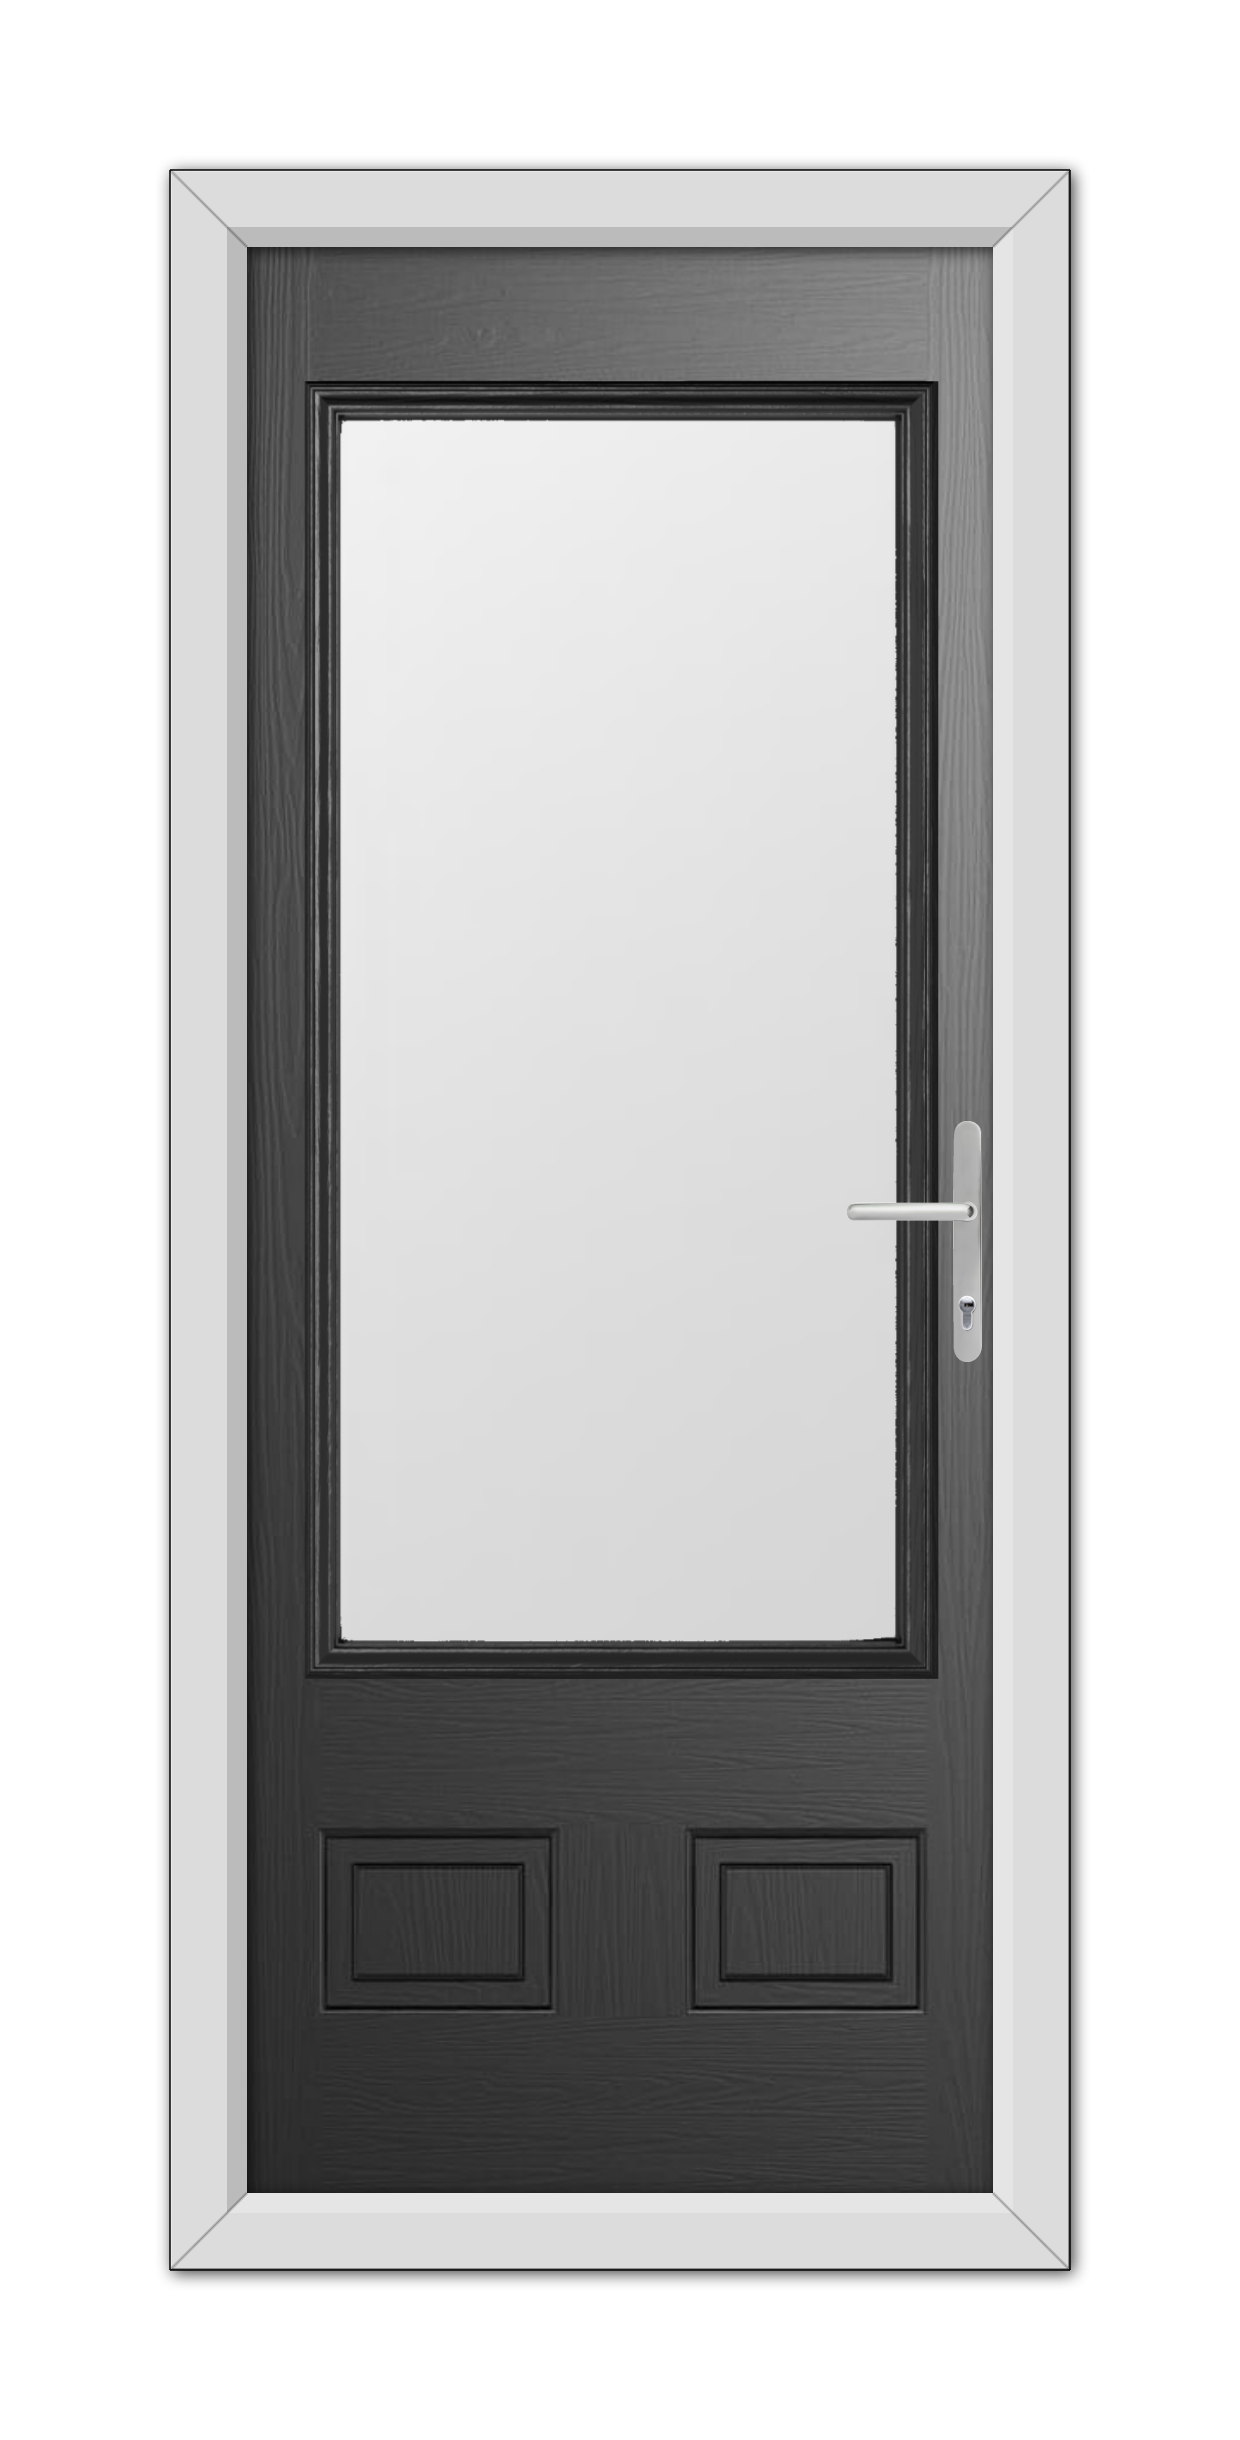 A modern Black Walcot Composite Door 48mm Timber Core with a white frame, featuring a central glass panel and a metallic handle on the right side.